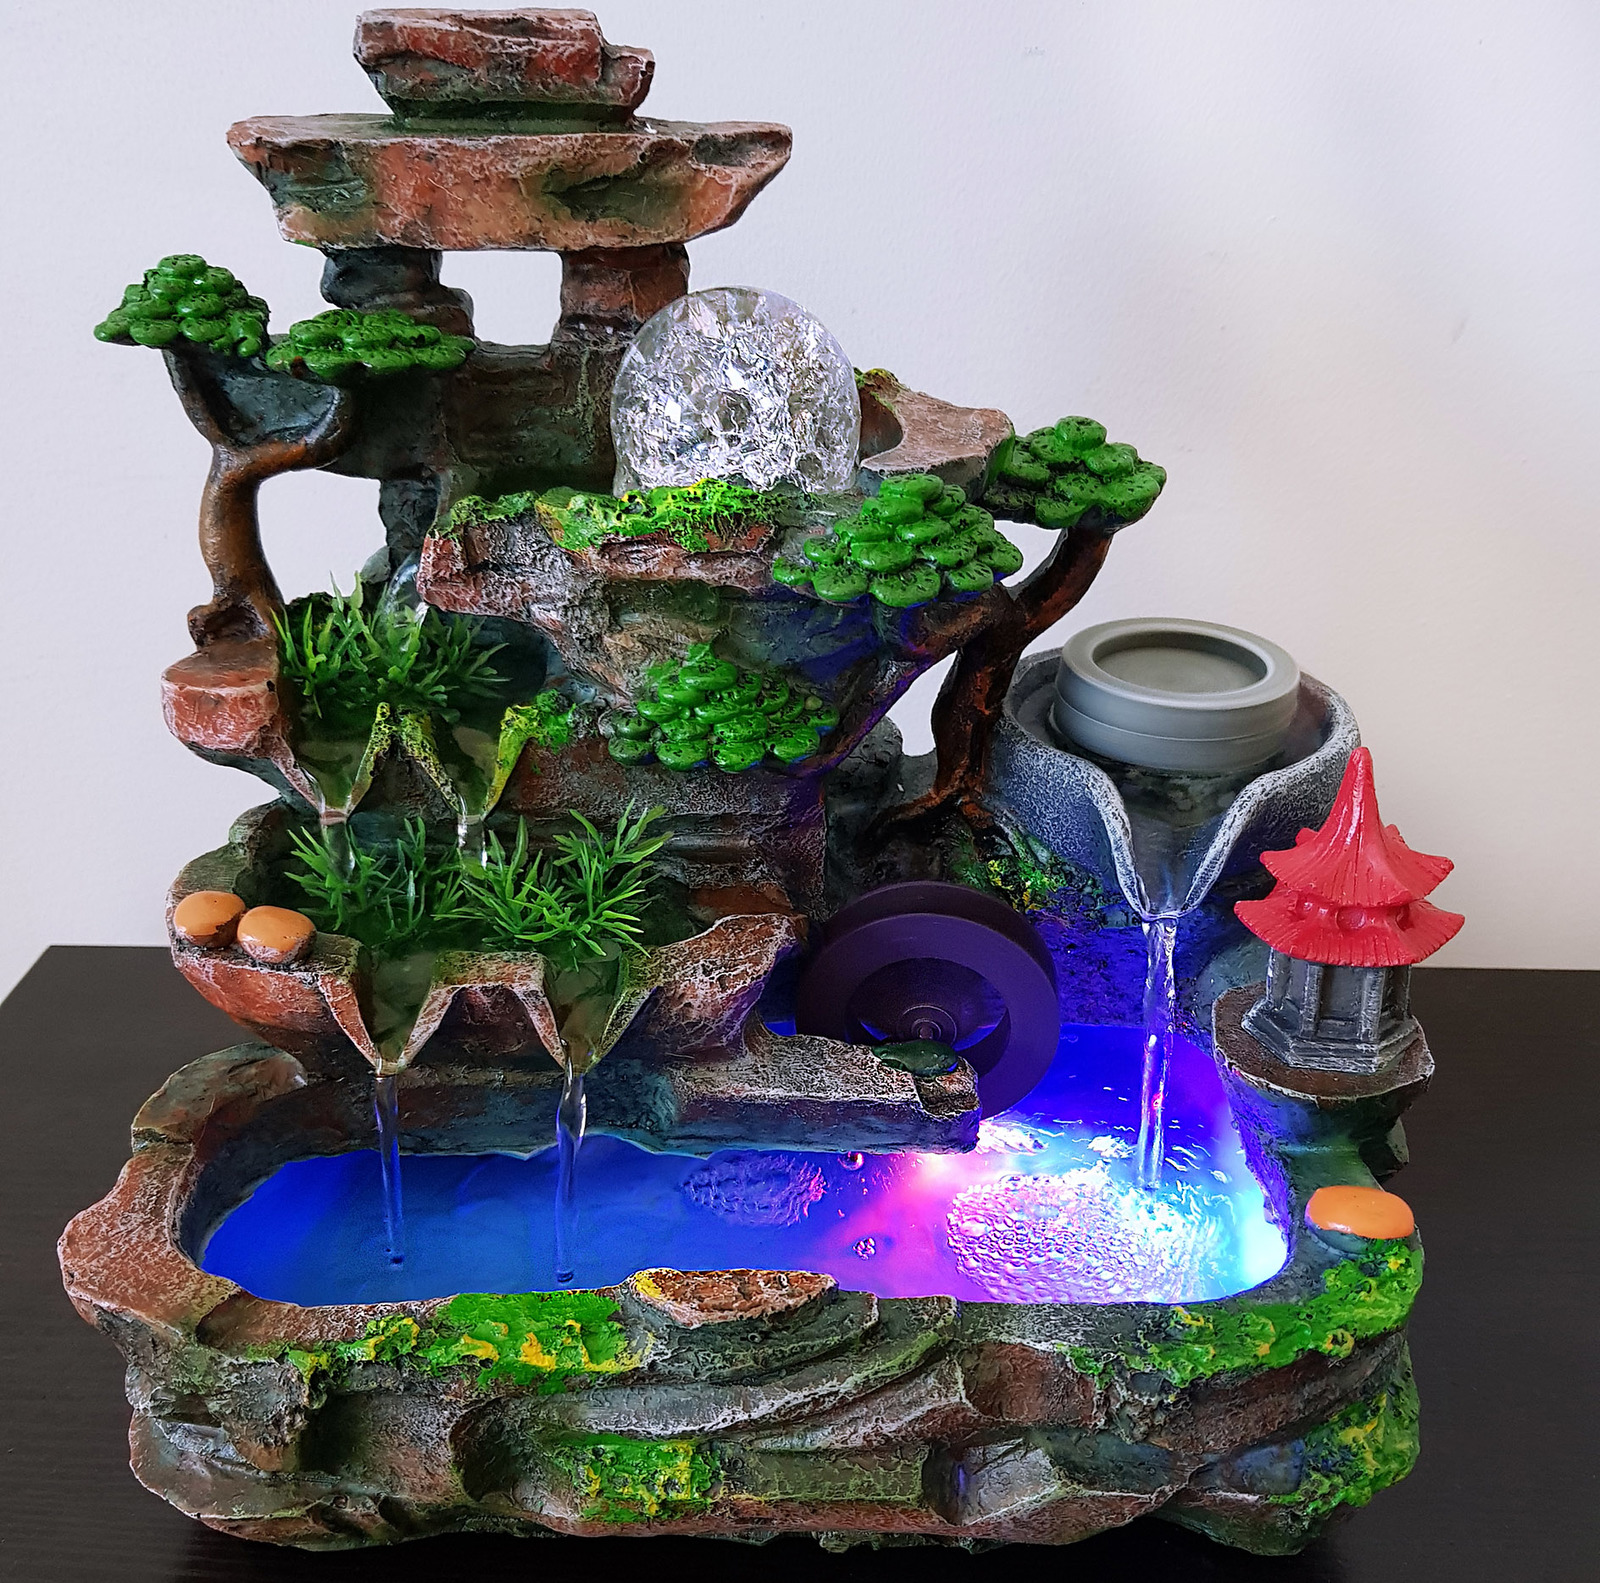 Calming Fountain Water Feature Ornament